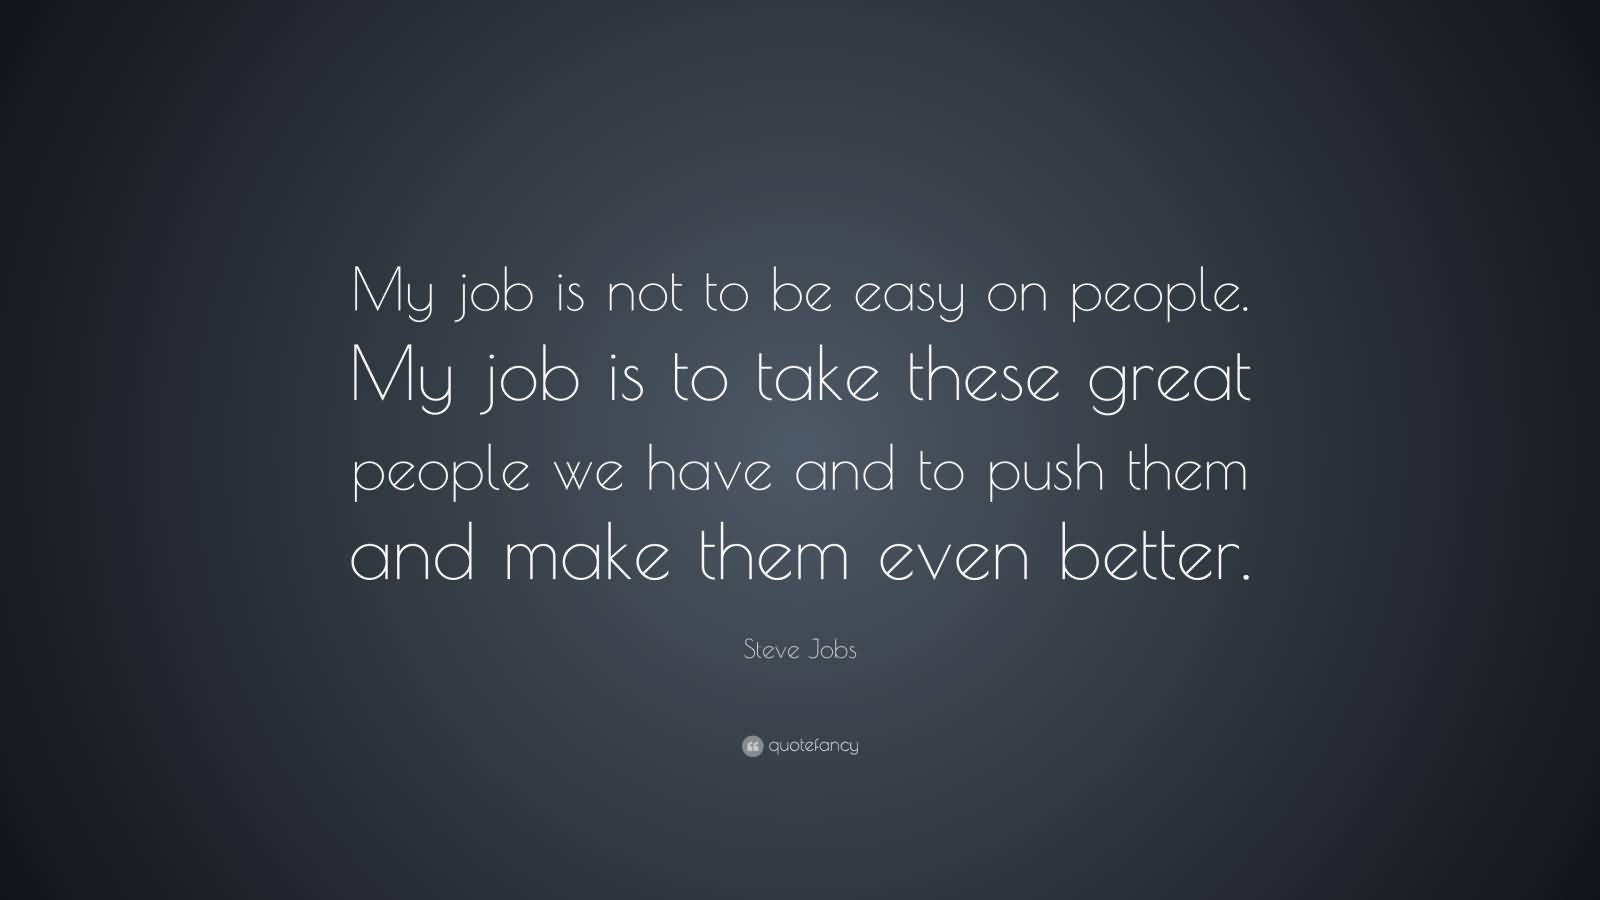 My job is not to be easy on people. My job is to take these great people we have and to push them and make them even better. Steve Jobs